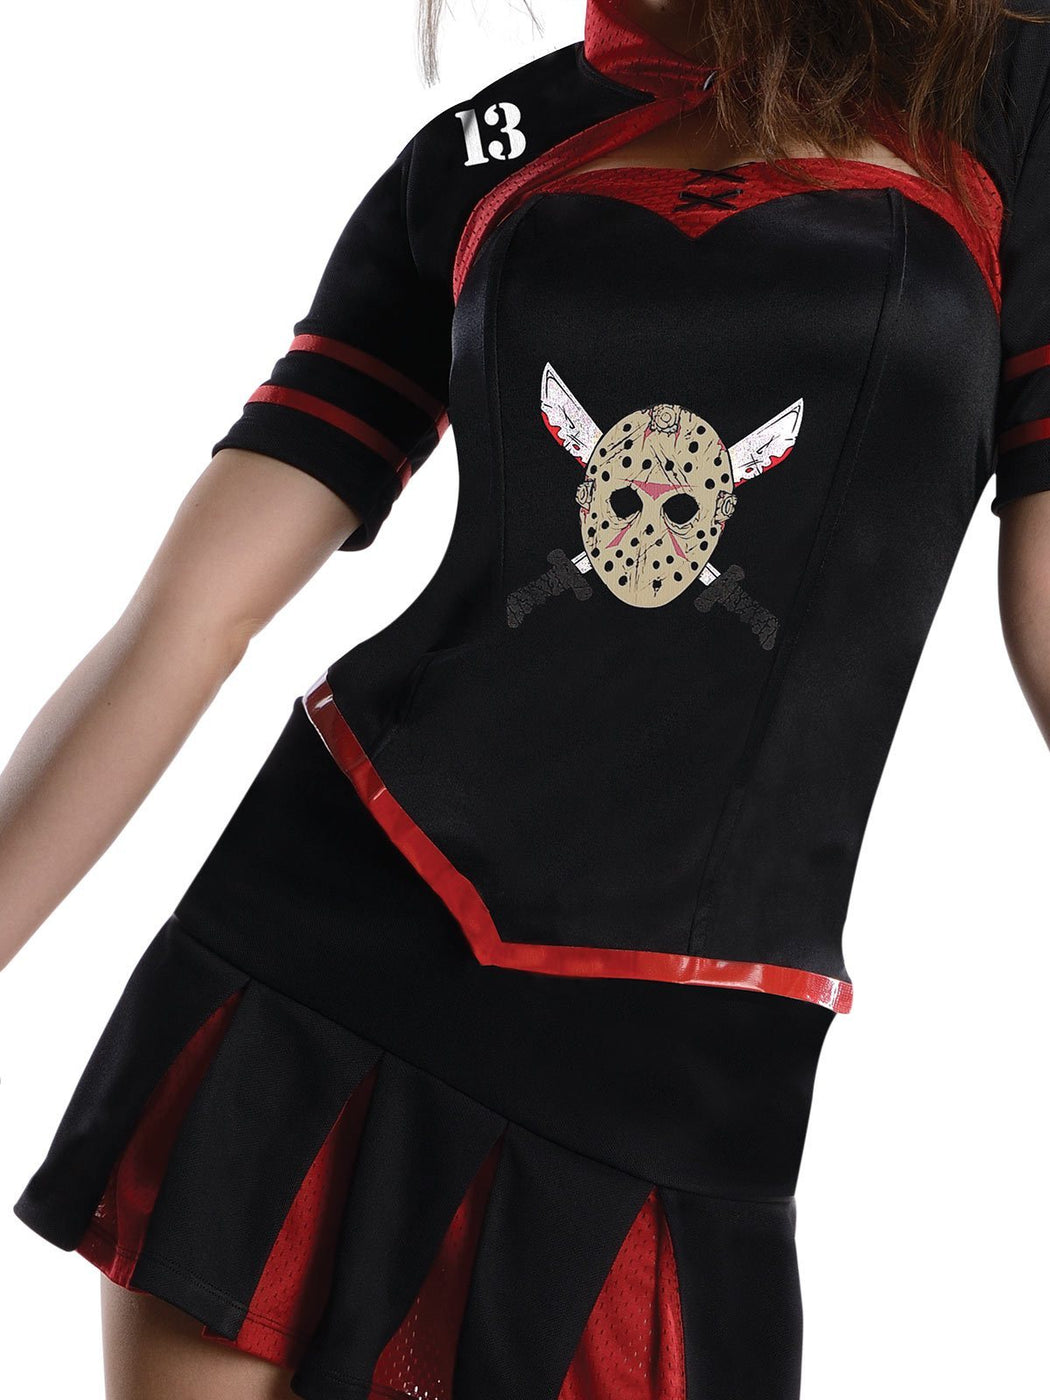 Jason Voorhees Cheerleader Costume for Adults - Friday the 13th ...